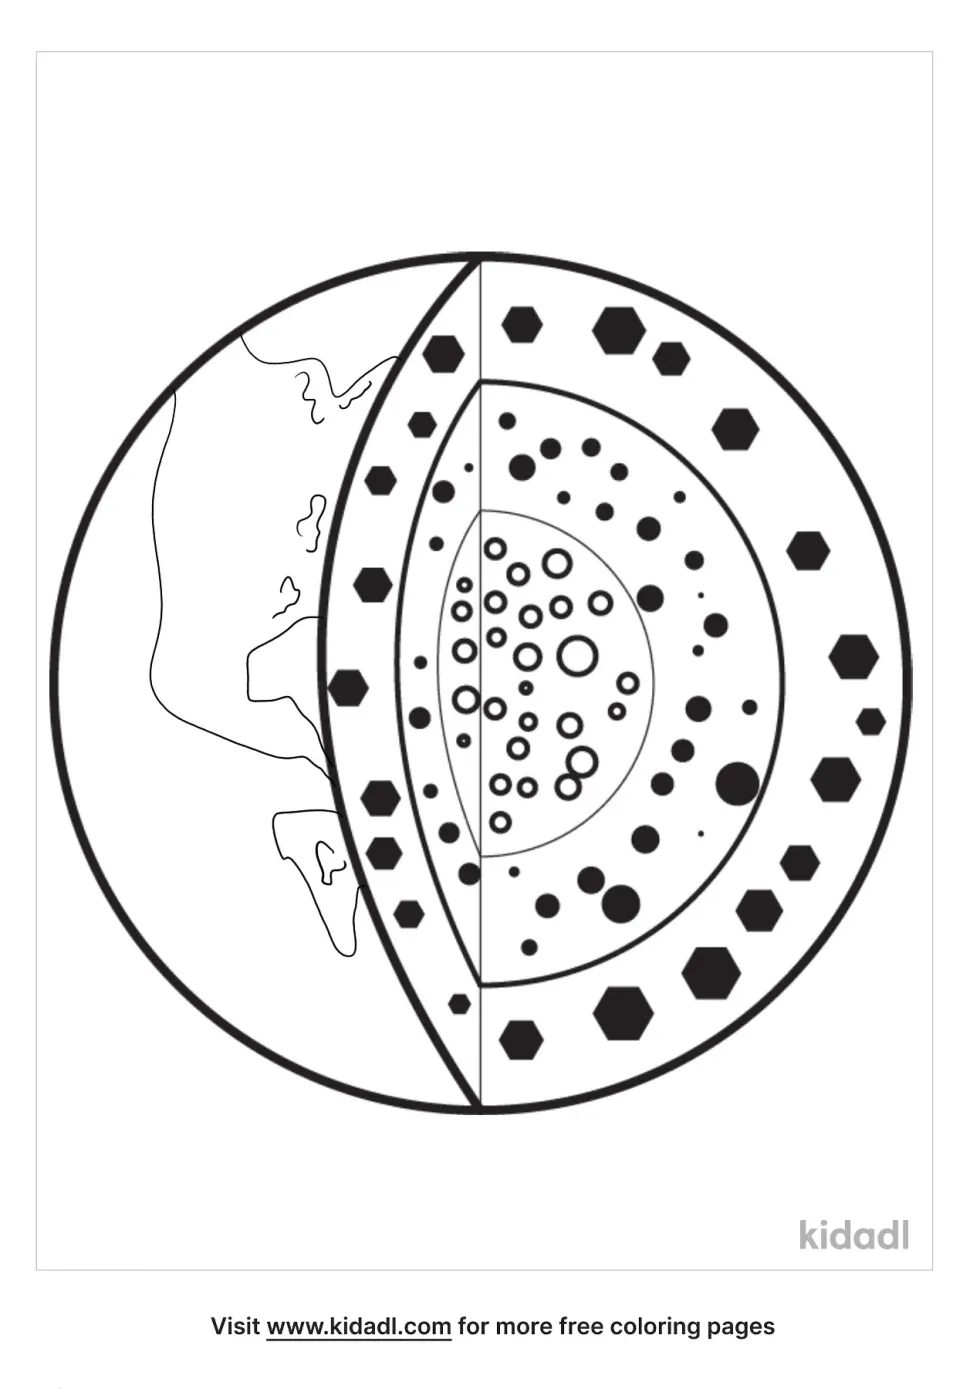 Geosphere Coloring Page